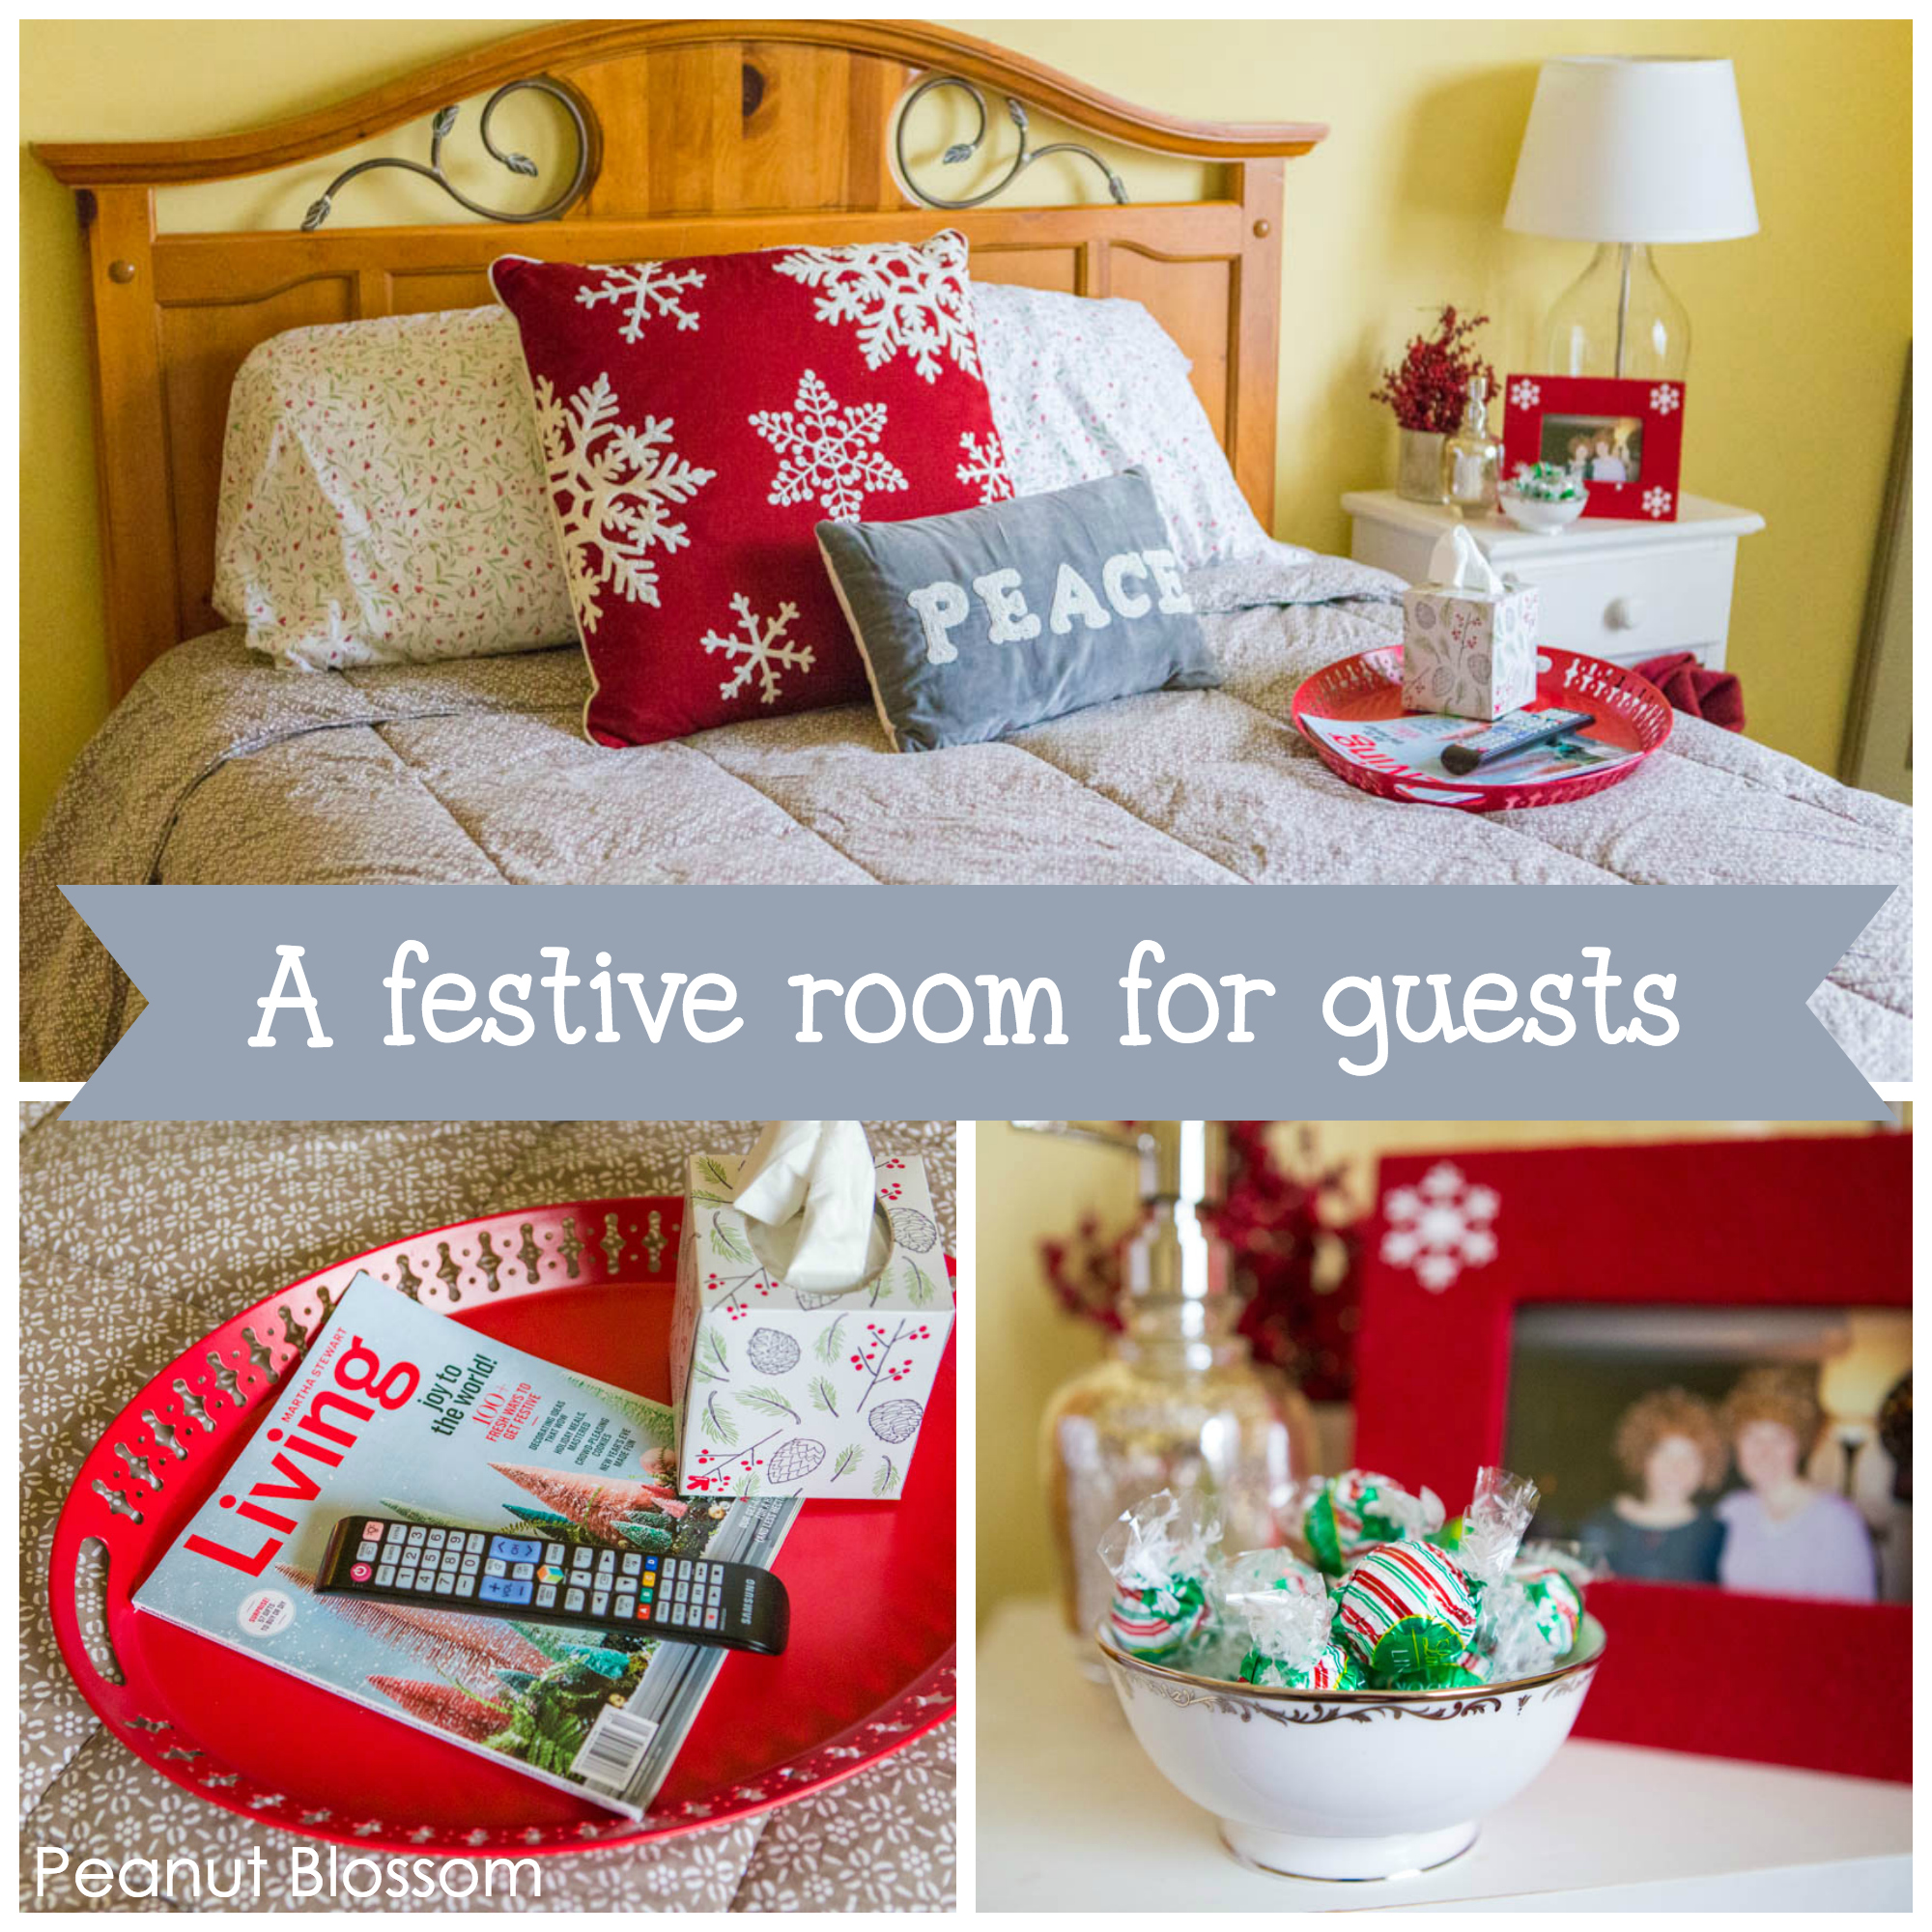 20 personal and festive guest room ideas for the holidays